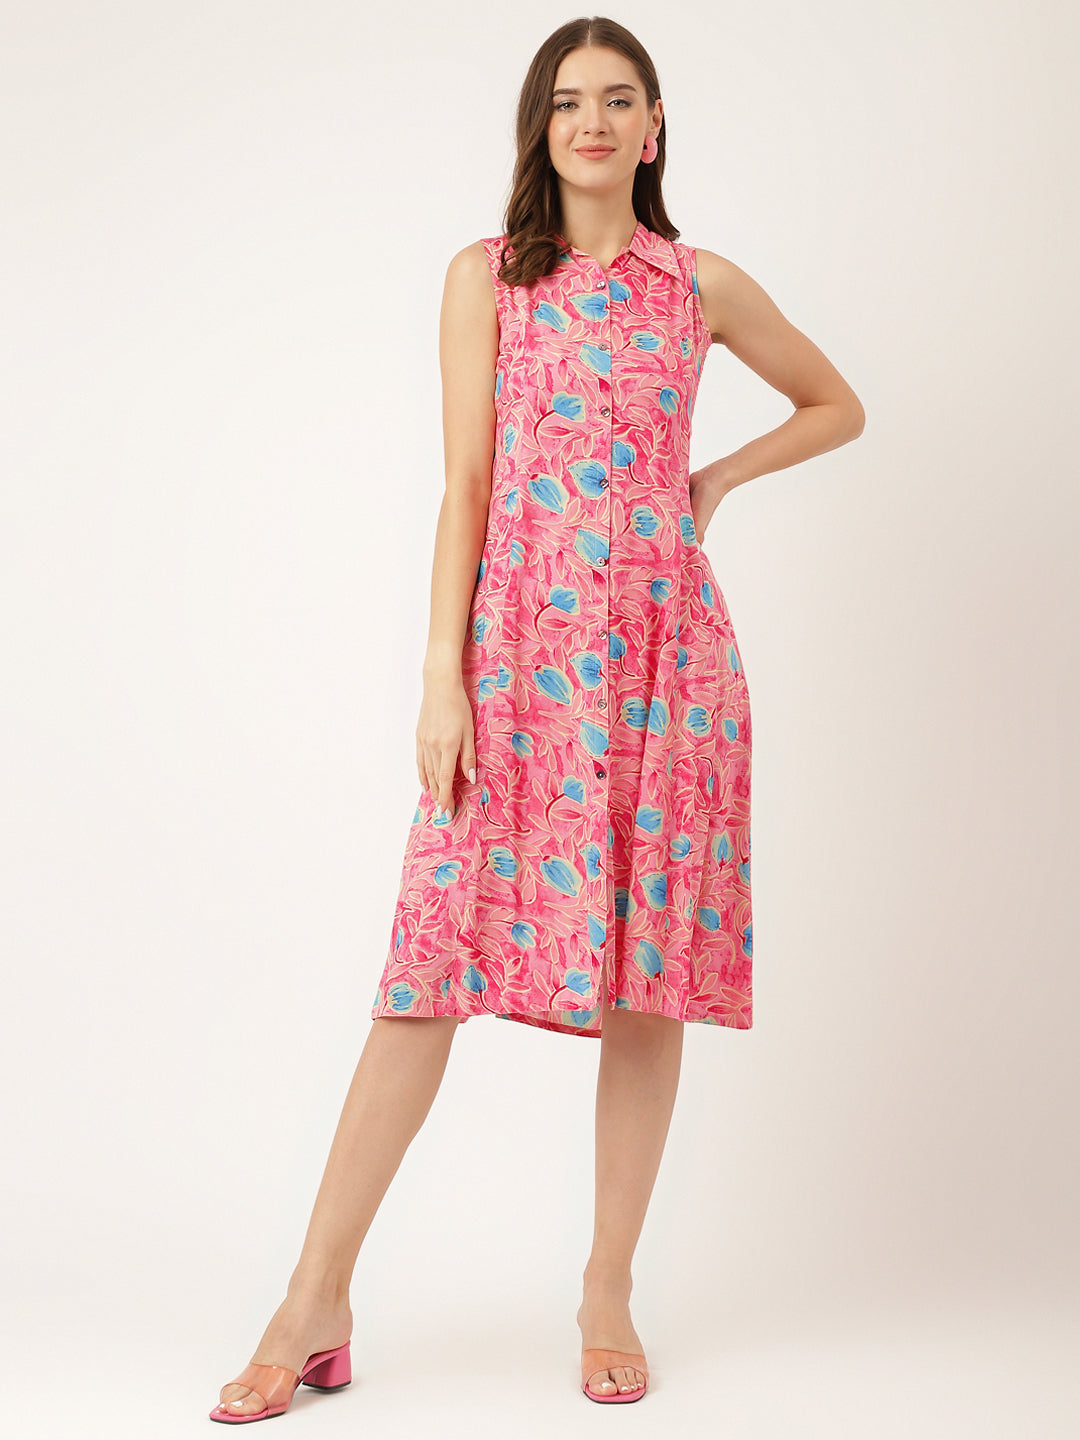 Divena Pink Floral Print Rayon A-Line Midi Dress with Attached Sleeves for Women